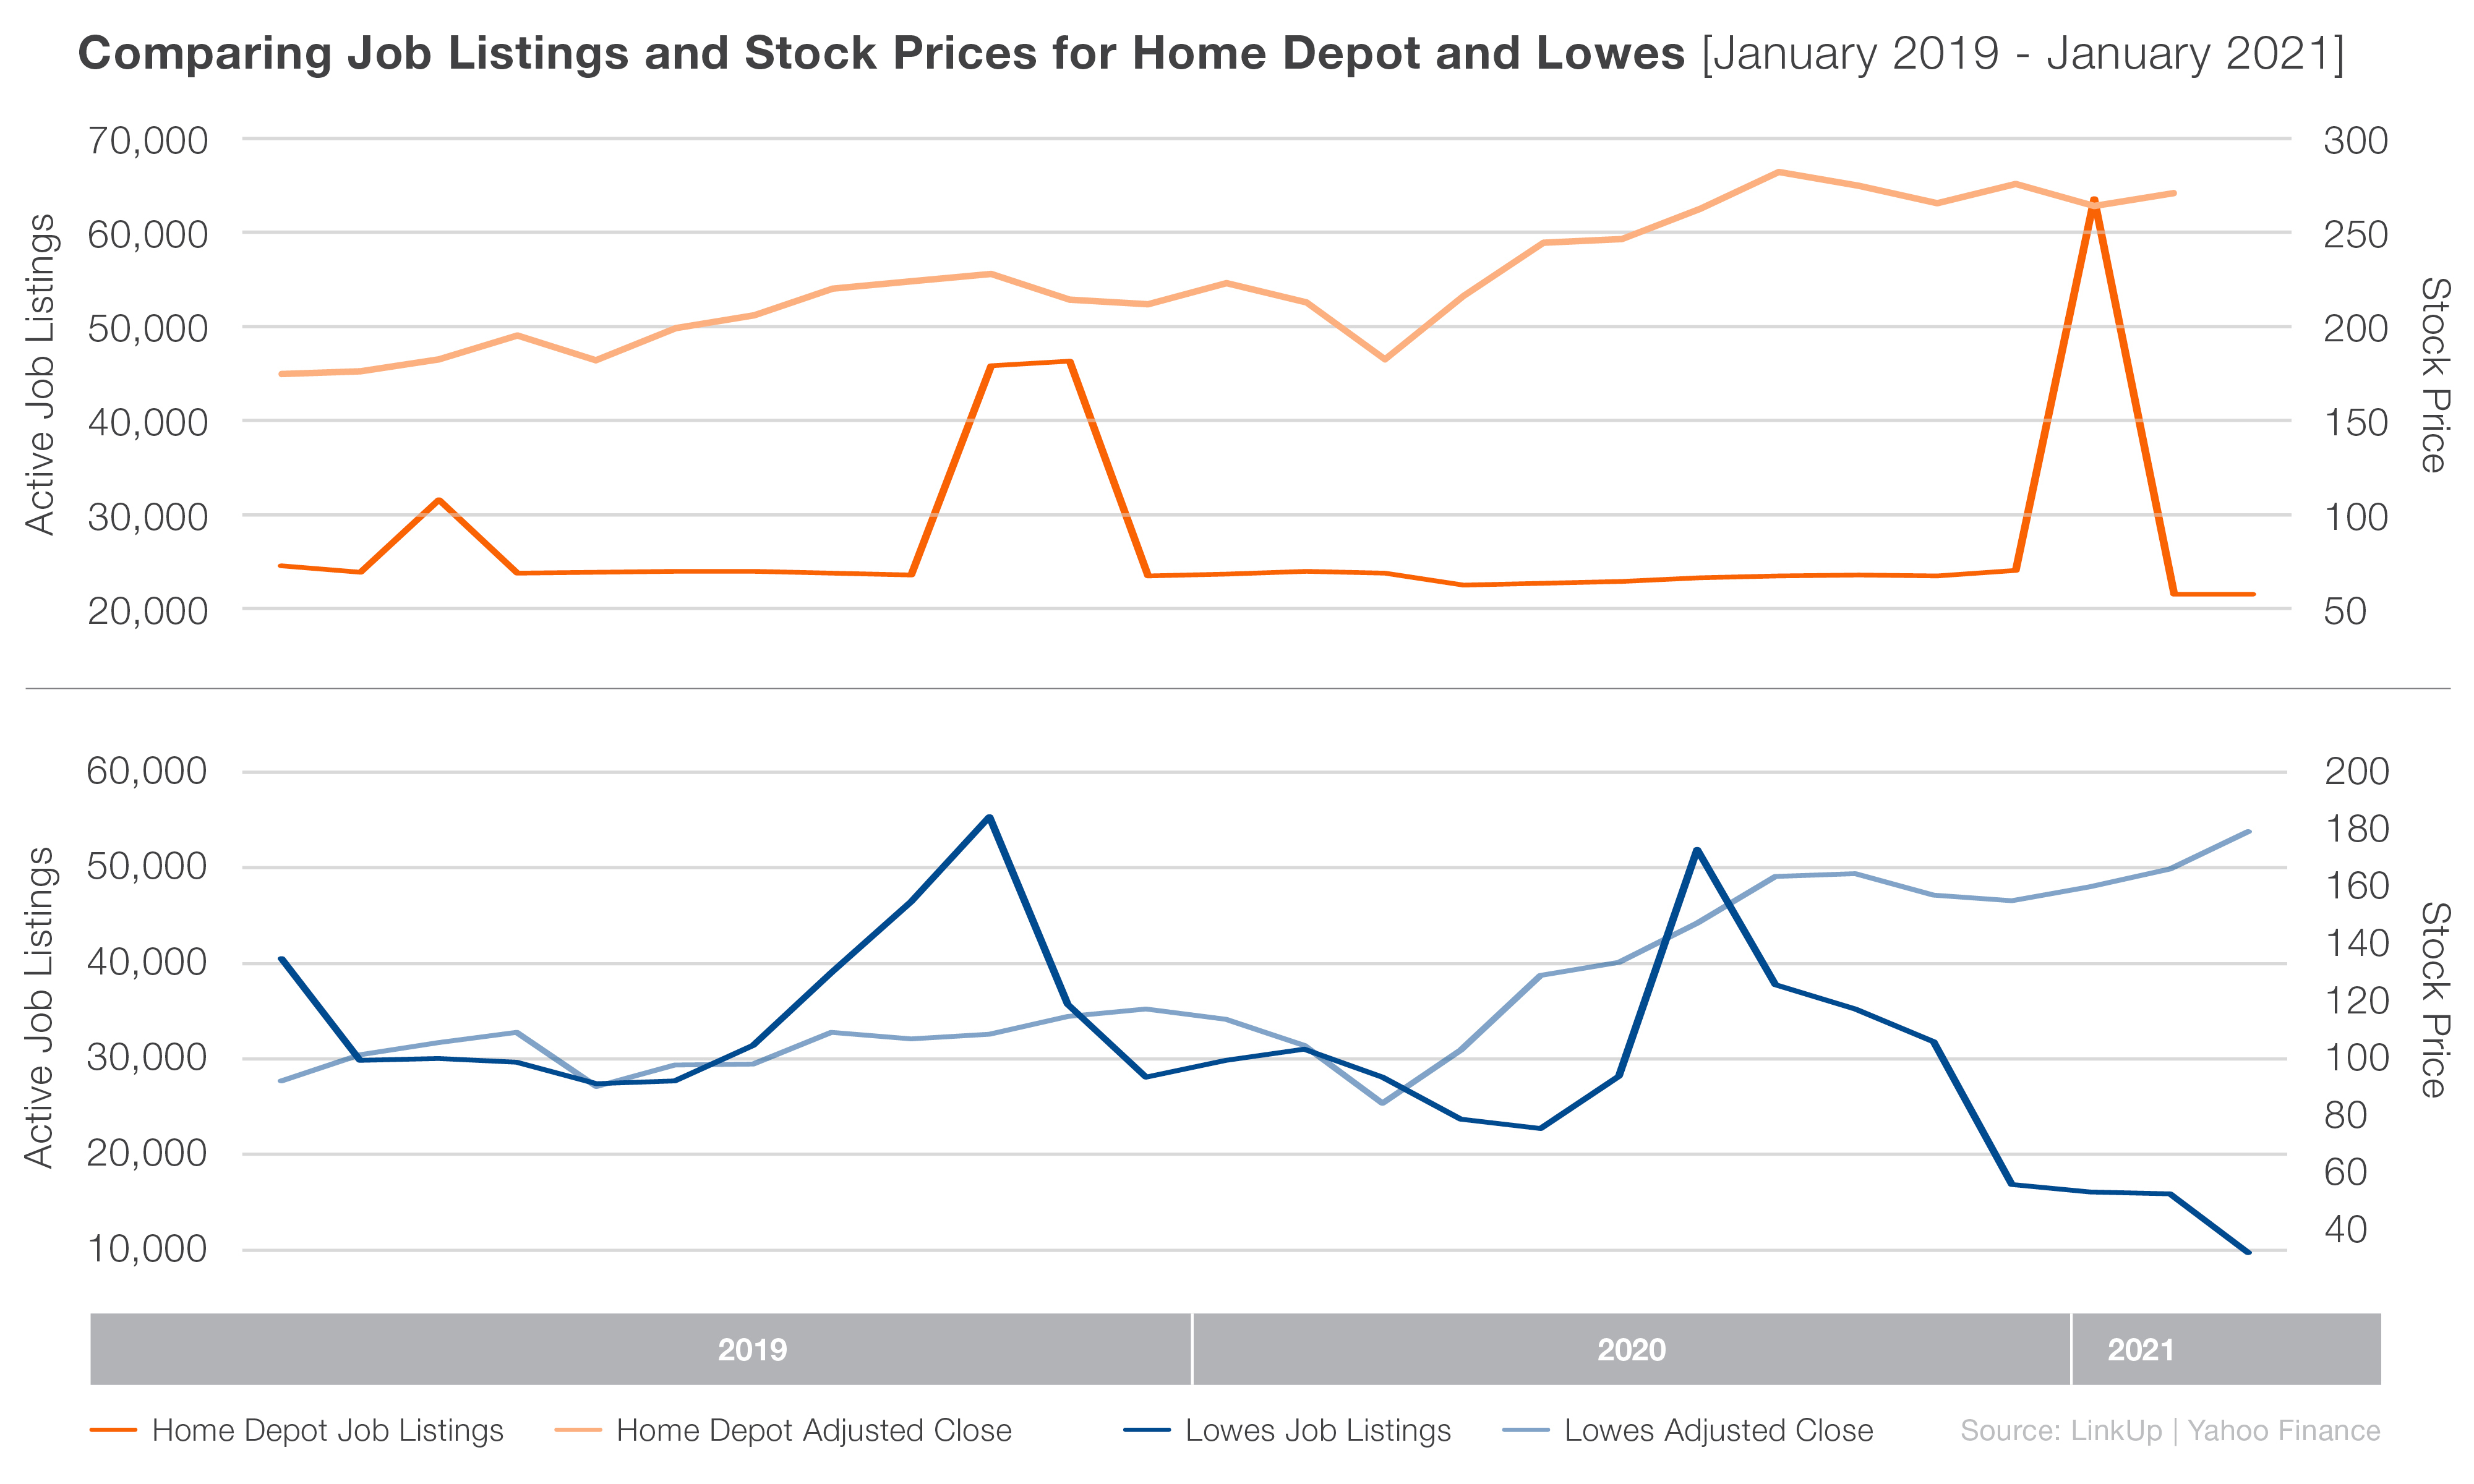 Comparing job listings and stock prices for Home Depot and Lowes